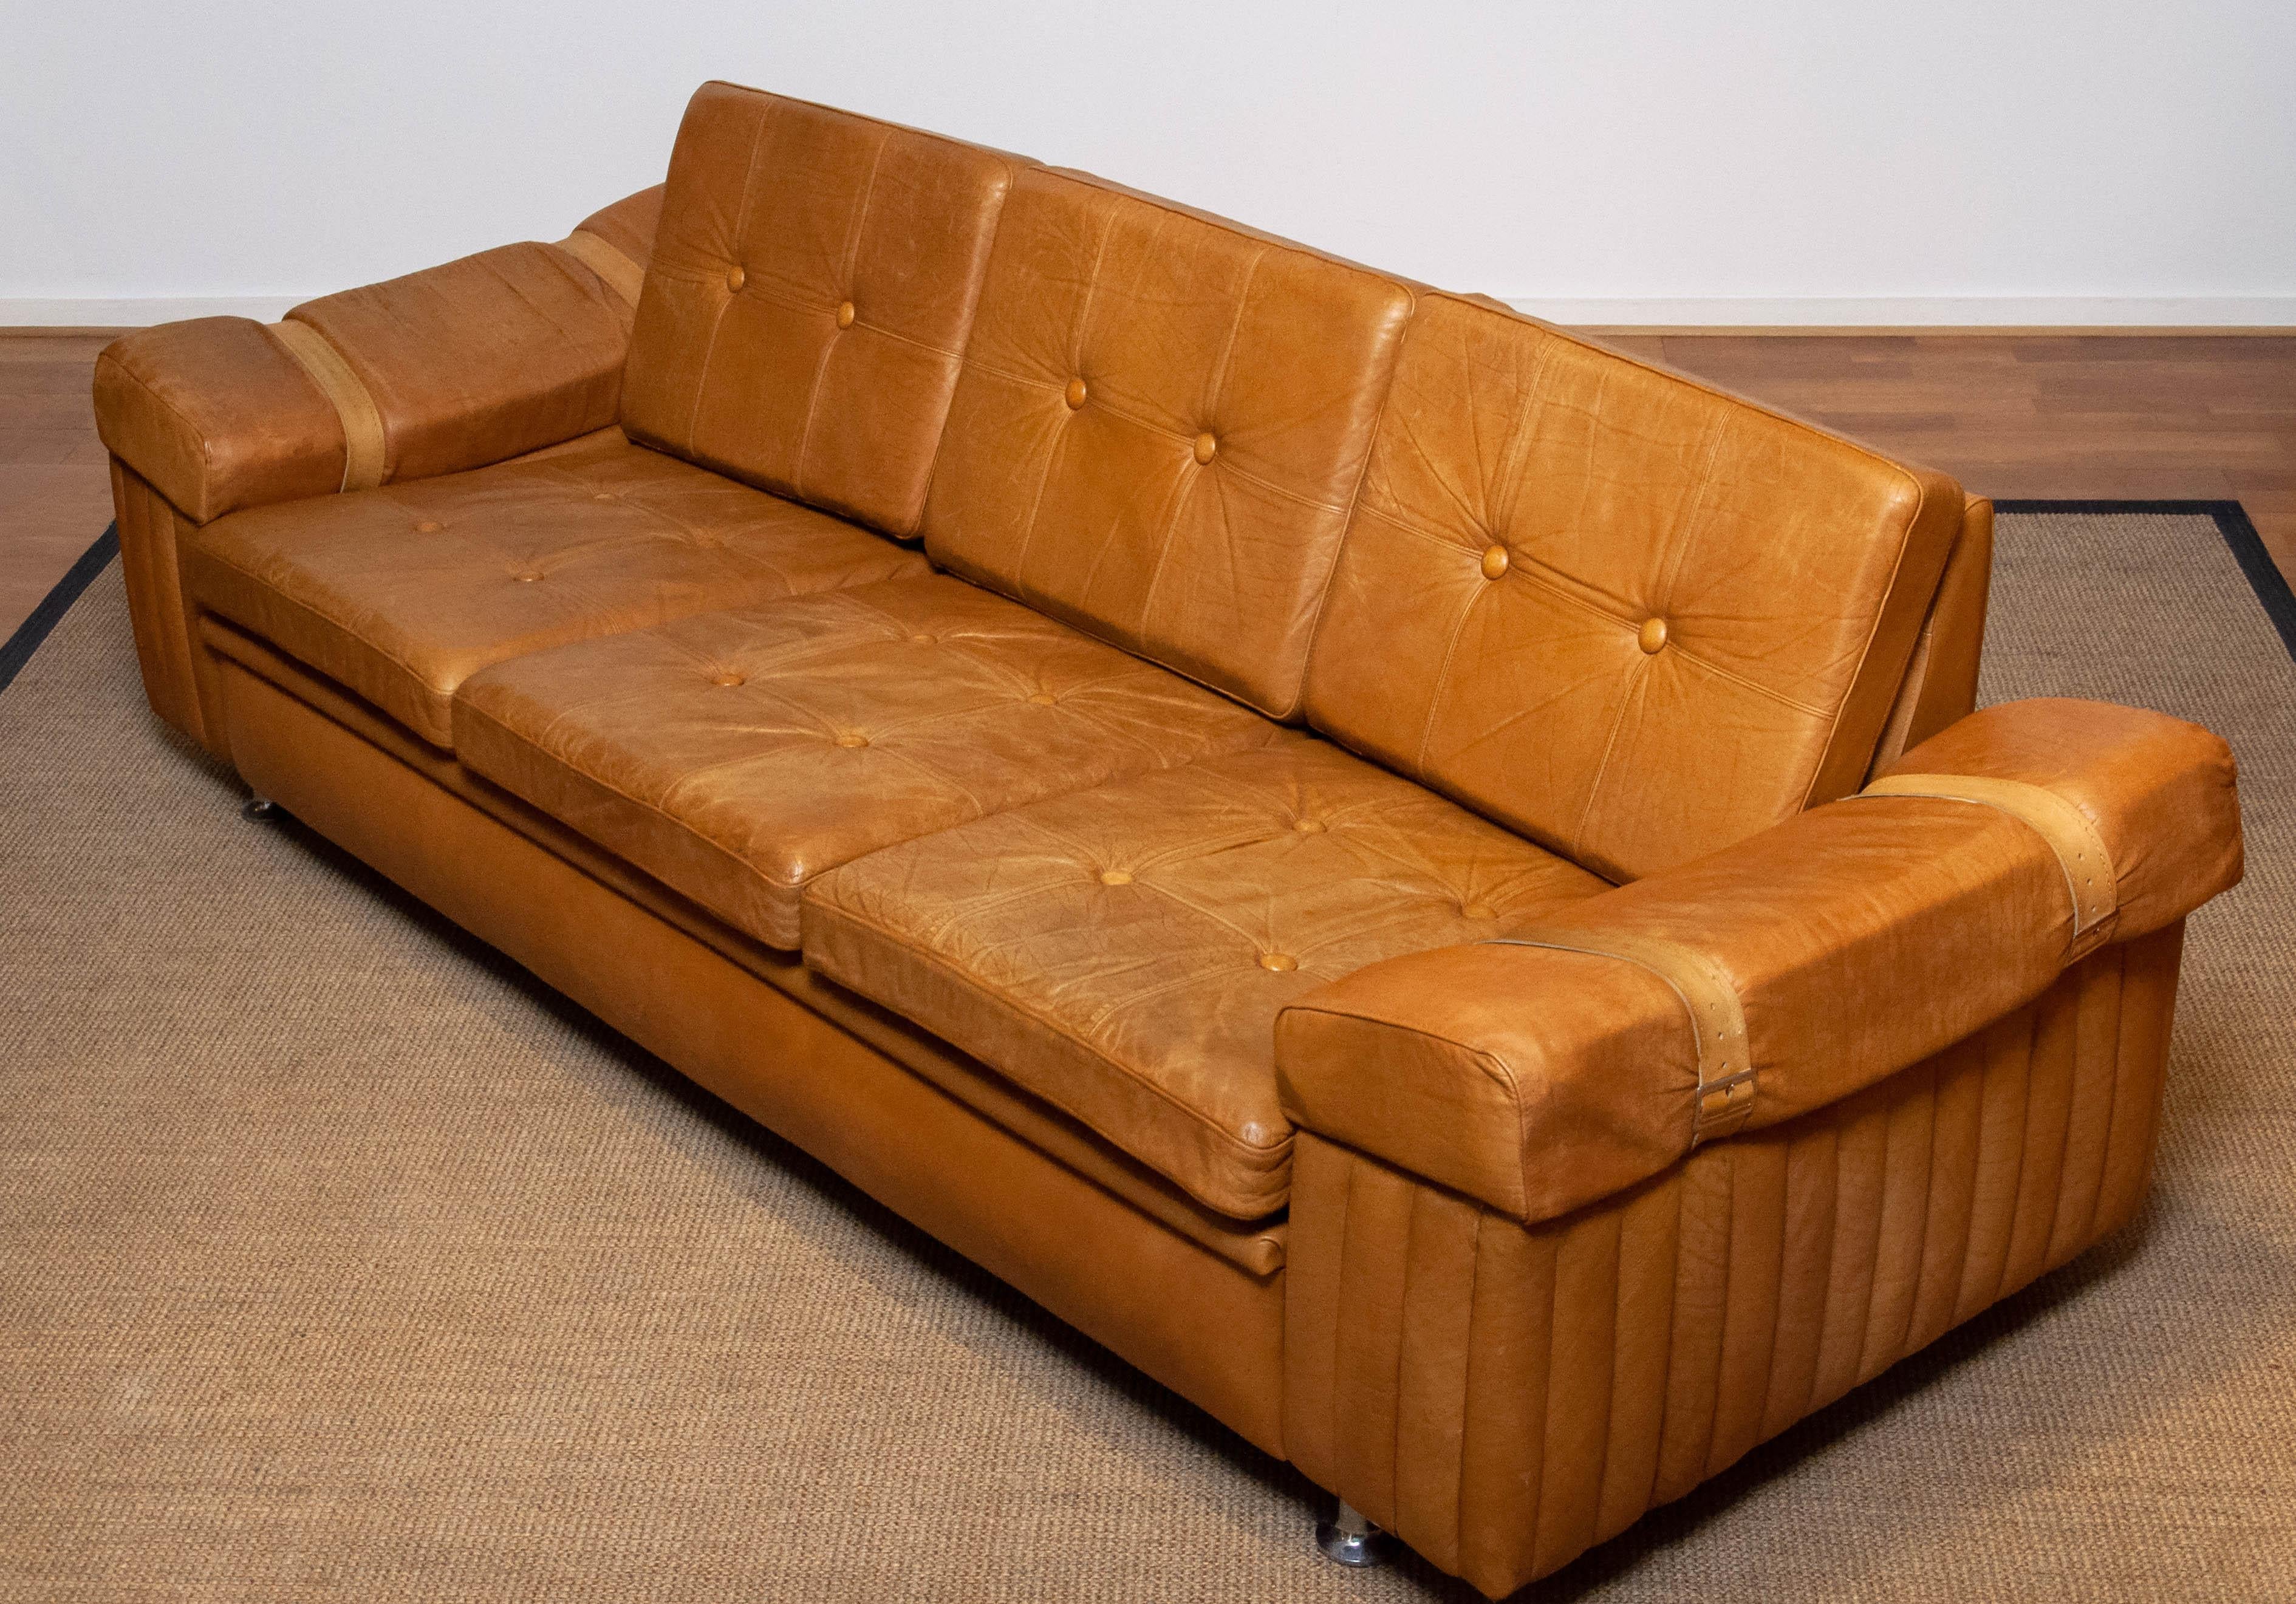 Late 20th Century 1970s Scandinavian Brutalist Three-Seater Low-Back Sofa in Camel Colored Leather For Sale